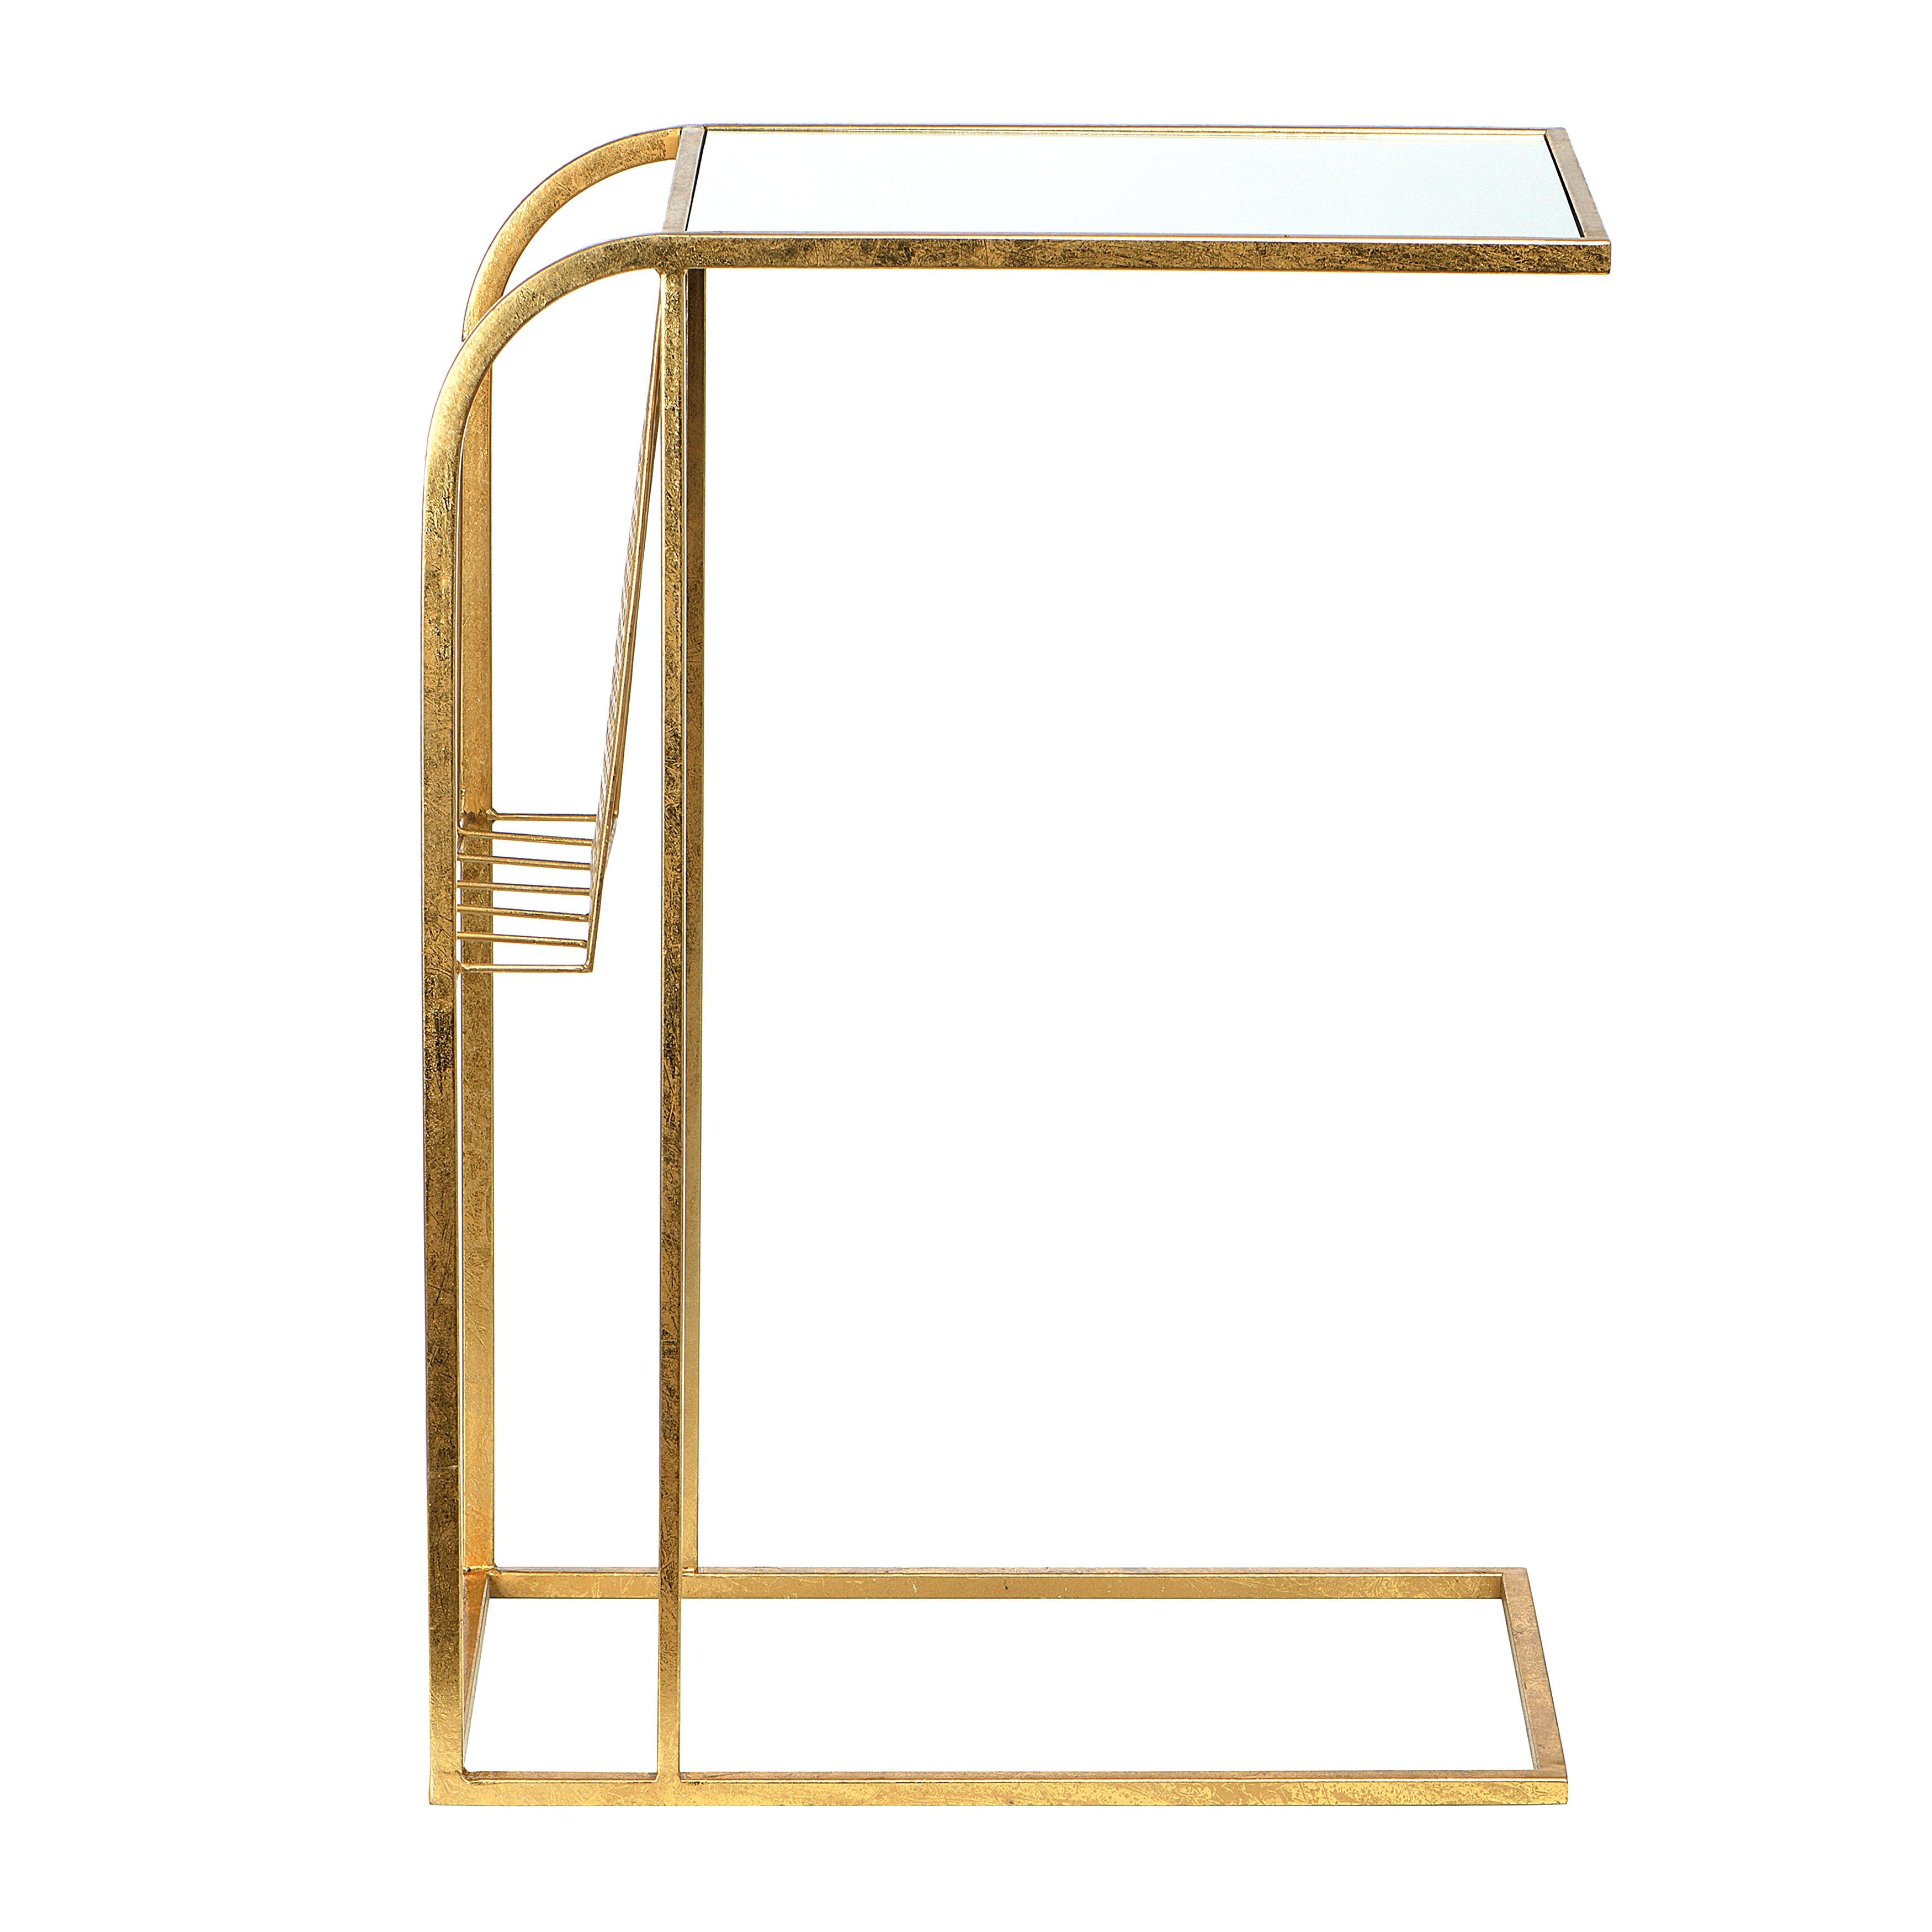 Gold Mirrored Metal Side Table with Magazine Rack, 27.5"